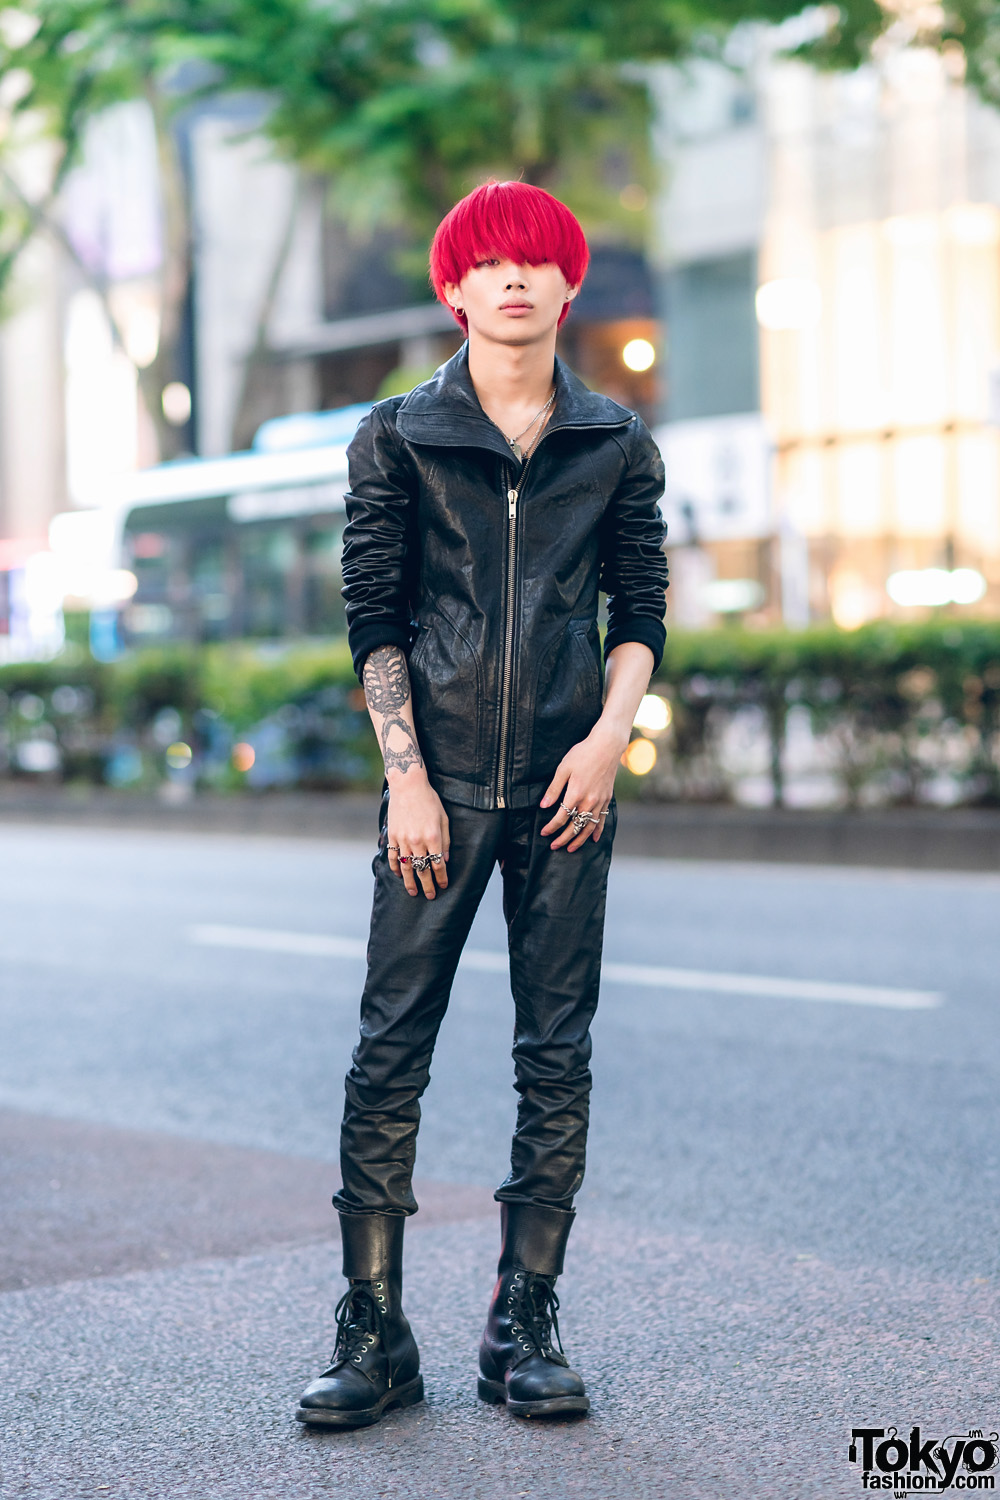 All Black Rick Owens Streetwear Style w/ Red Bob, Faux Leather Jacket, Skinny Pants, Tokyo Human Experiments Knuckle Rings & Vintage Boots